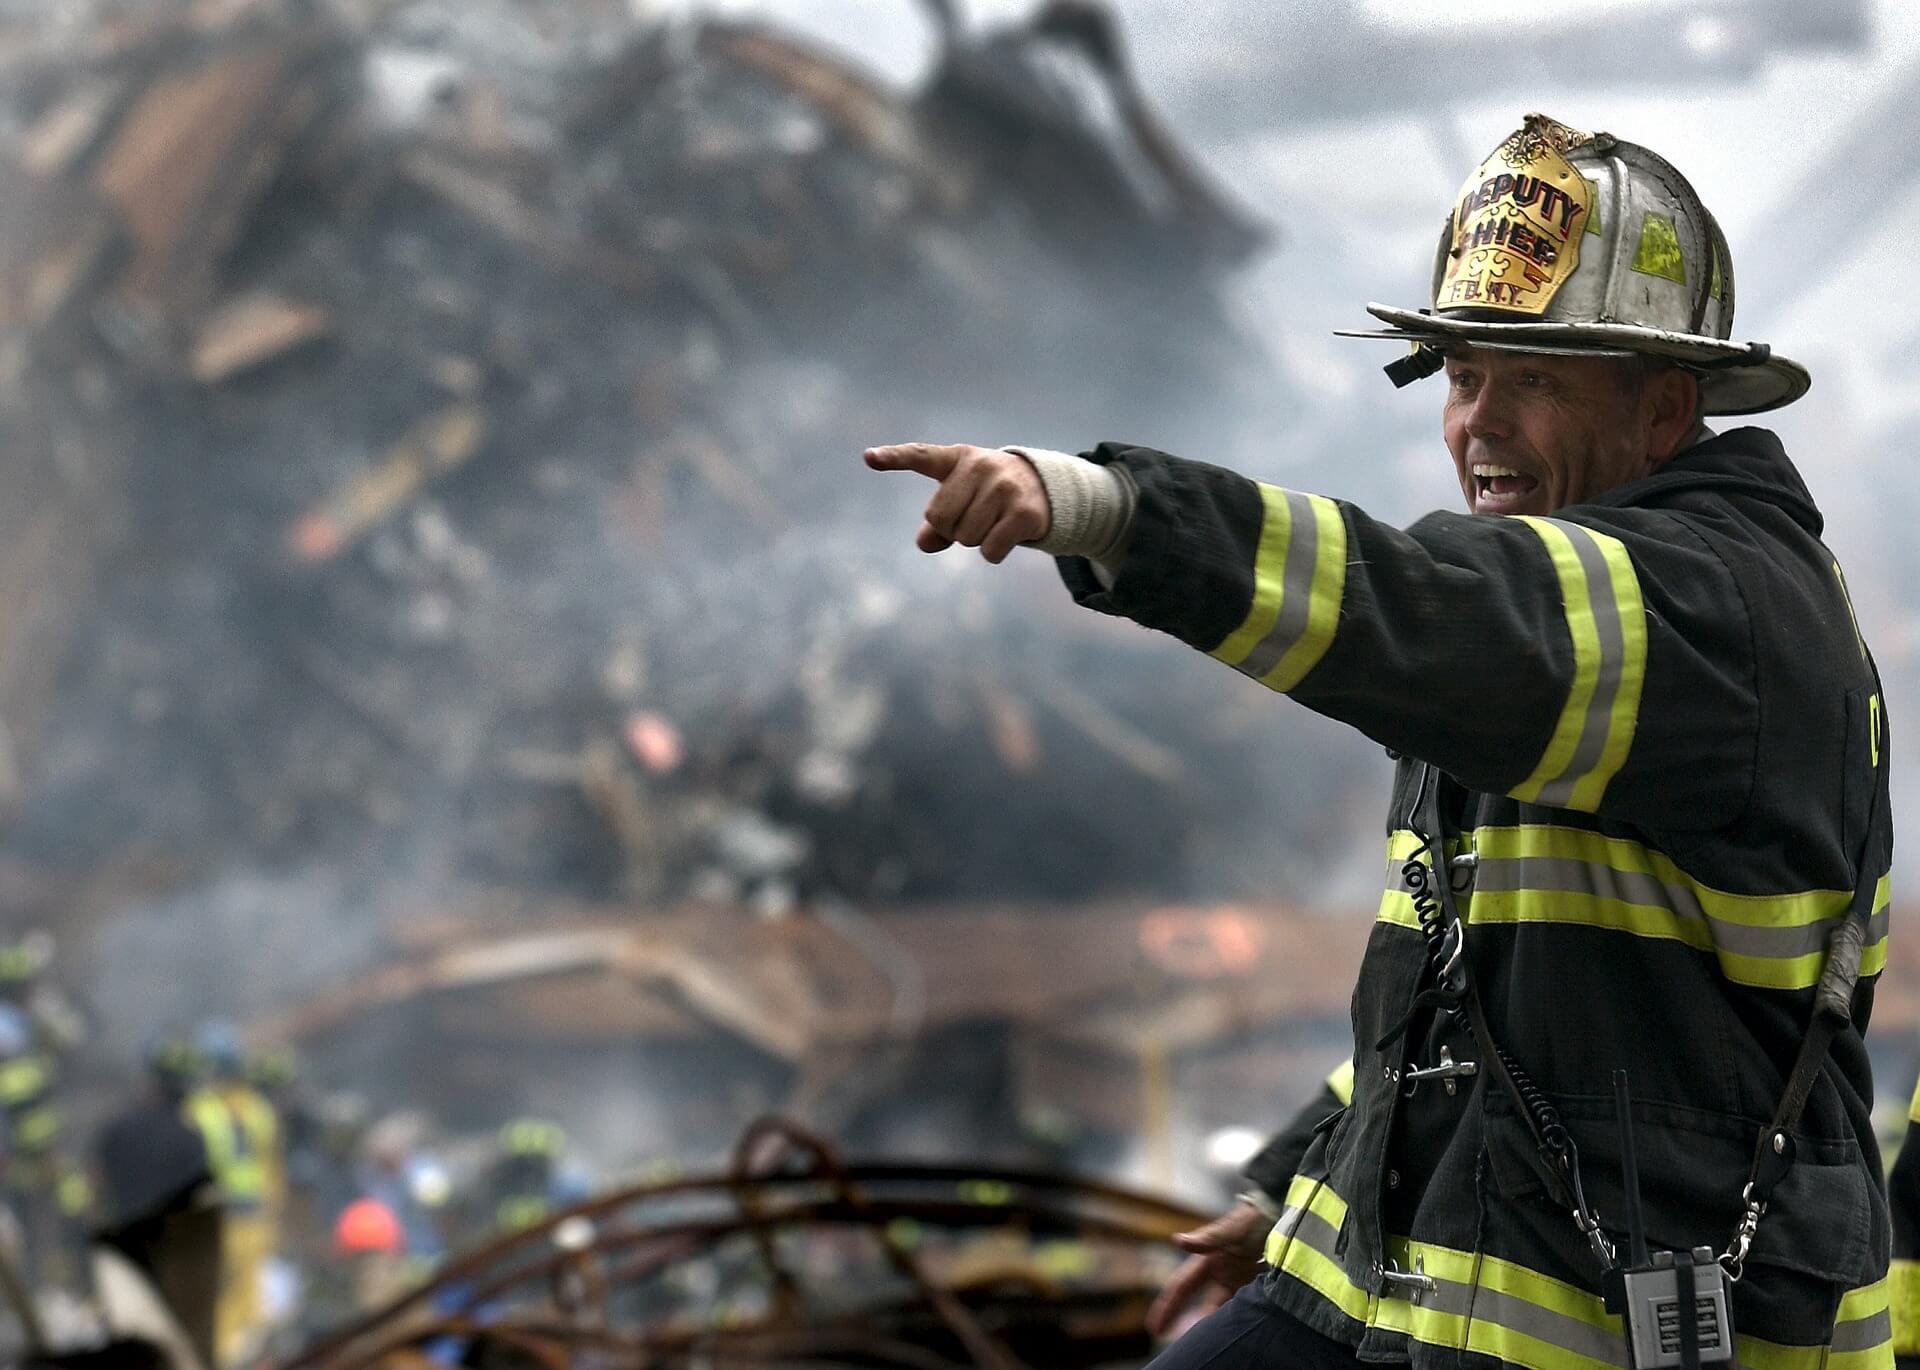 fireman standing in wreckage giving command